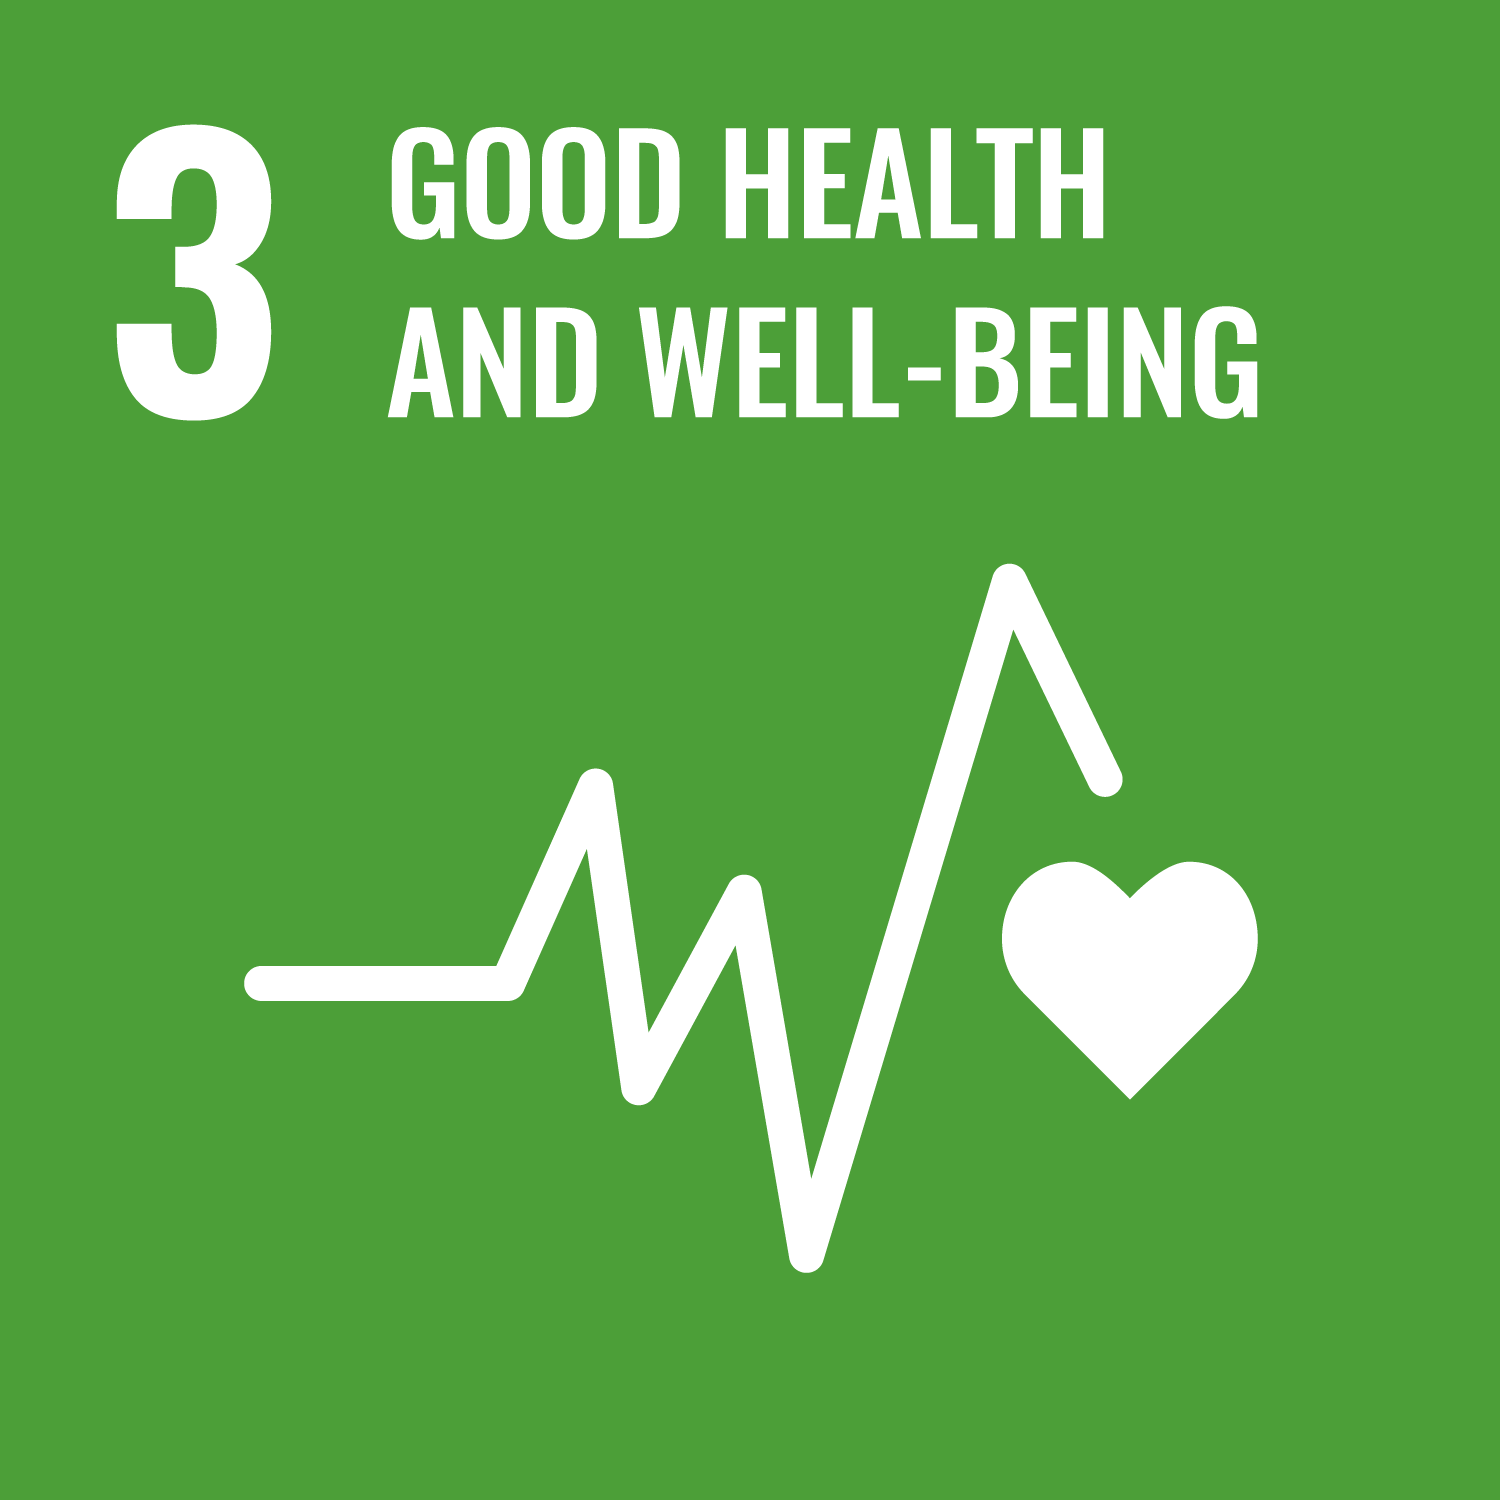 03 good health and well-being